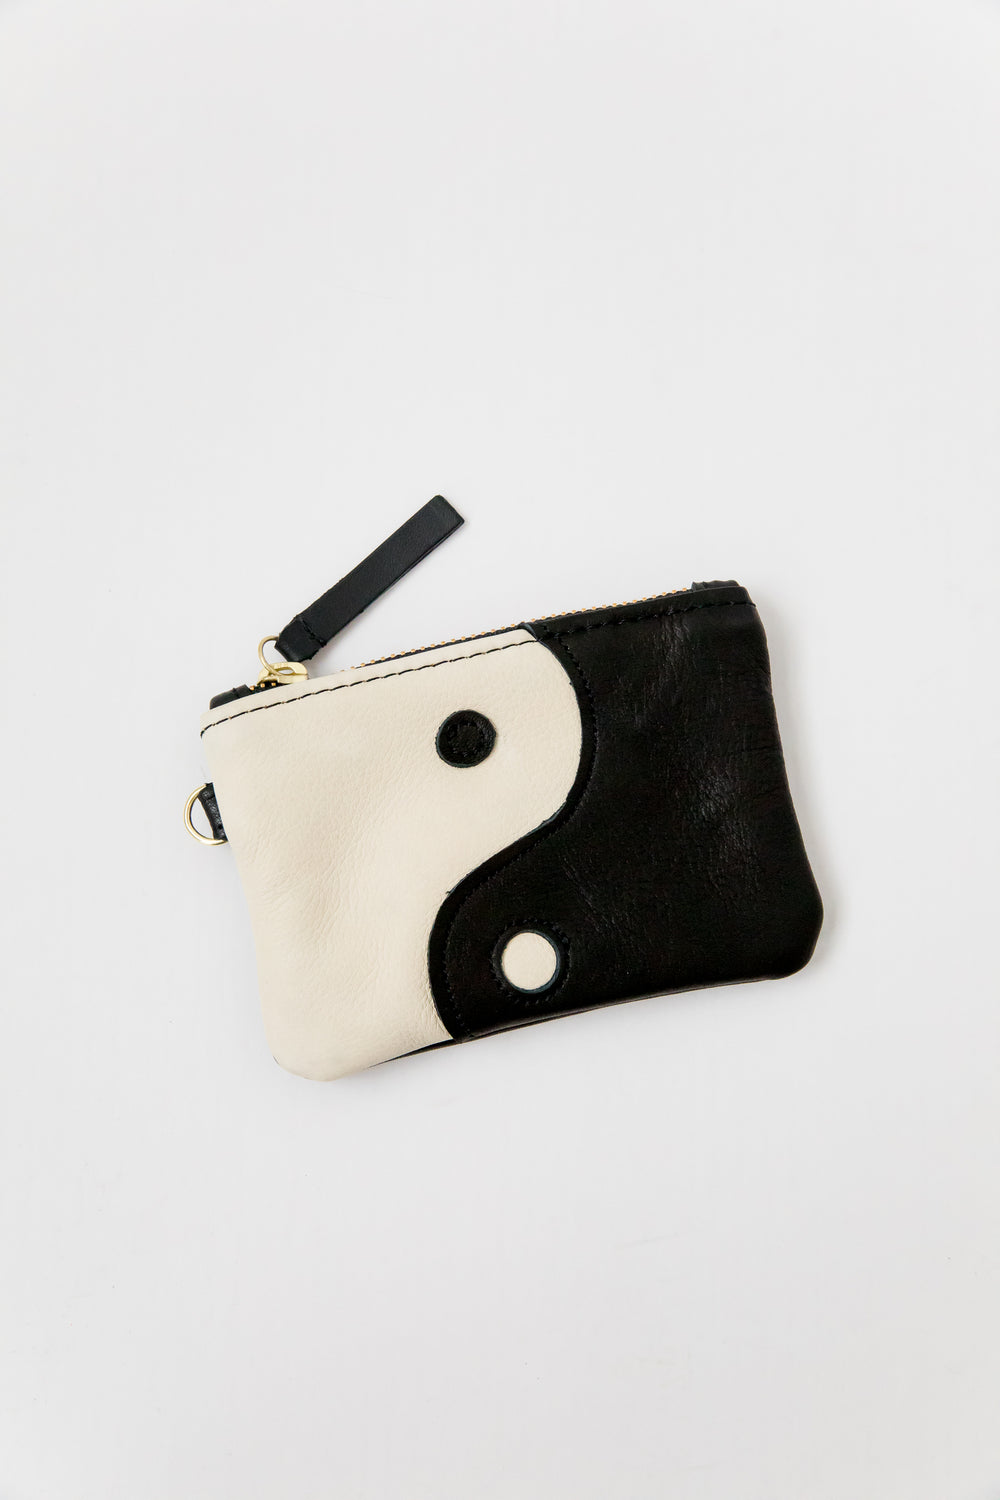 X Prism Black + Cream Yin Yang Coin Pouch